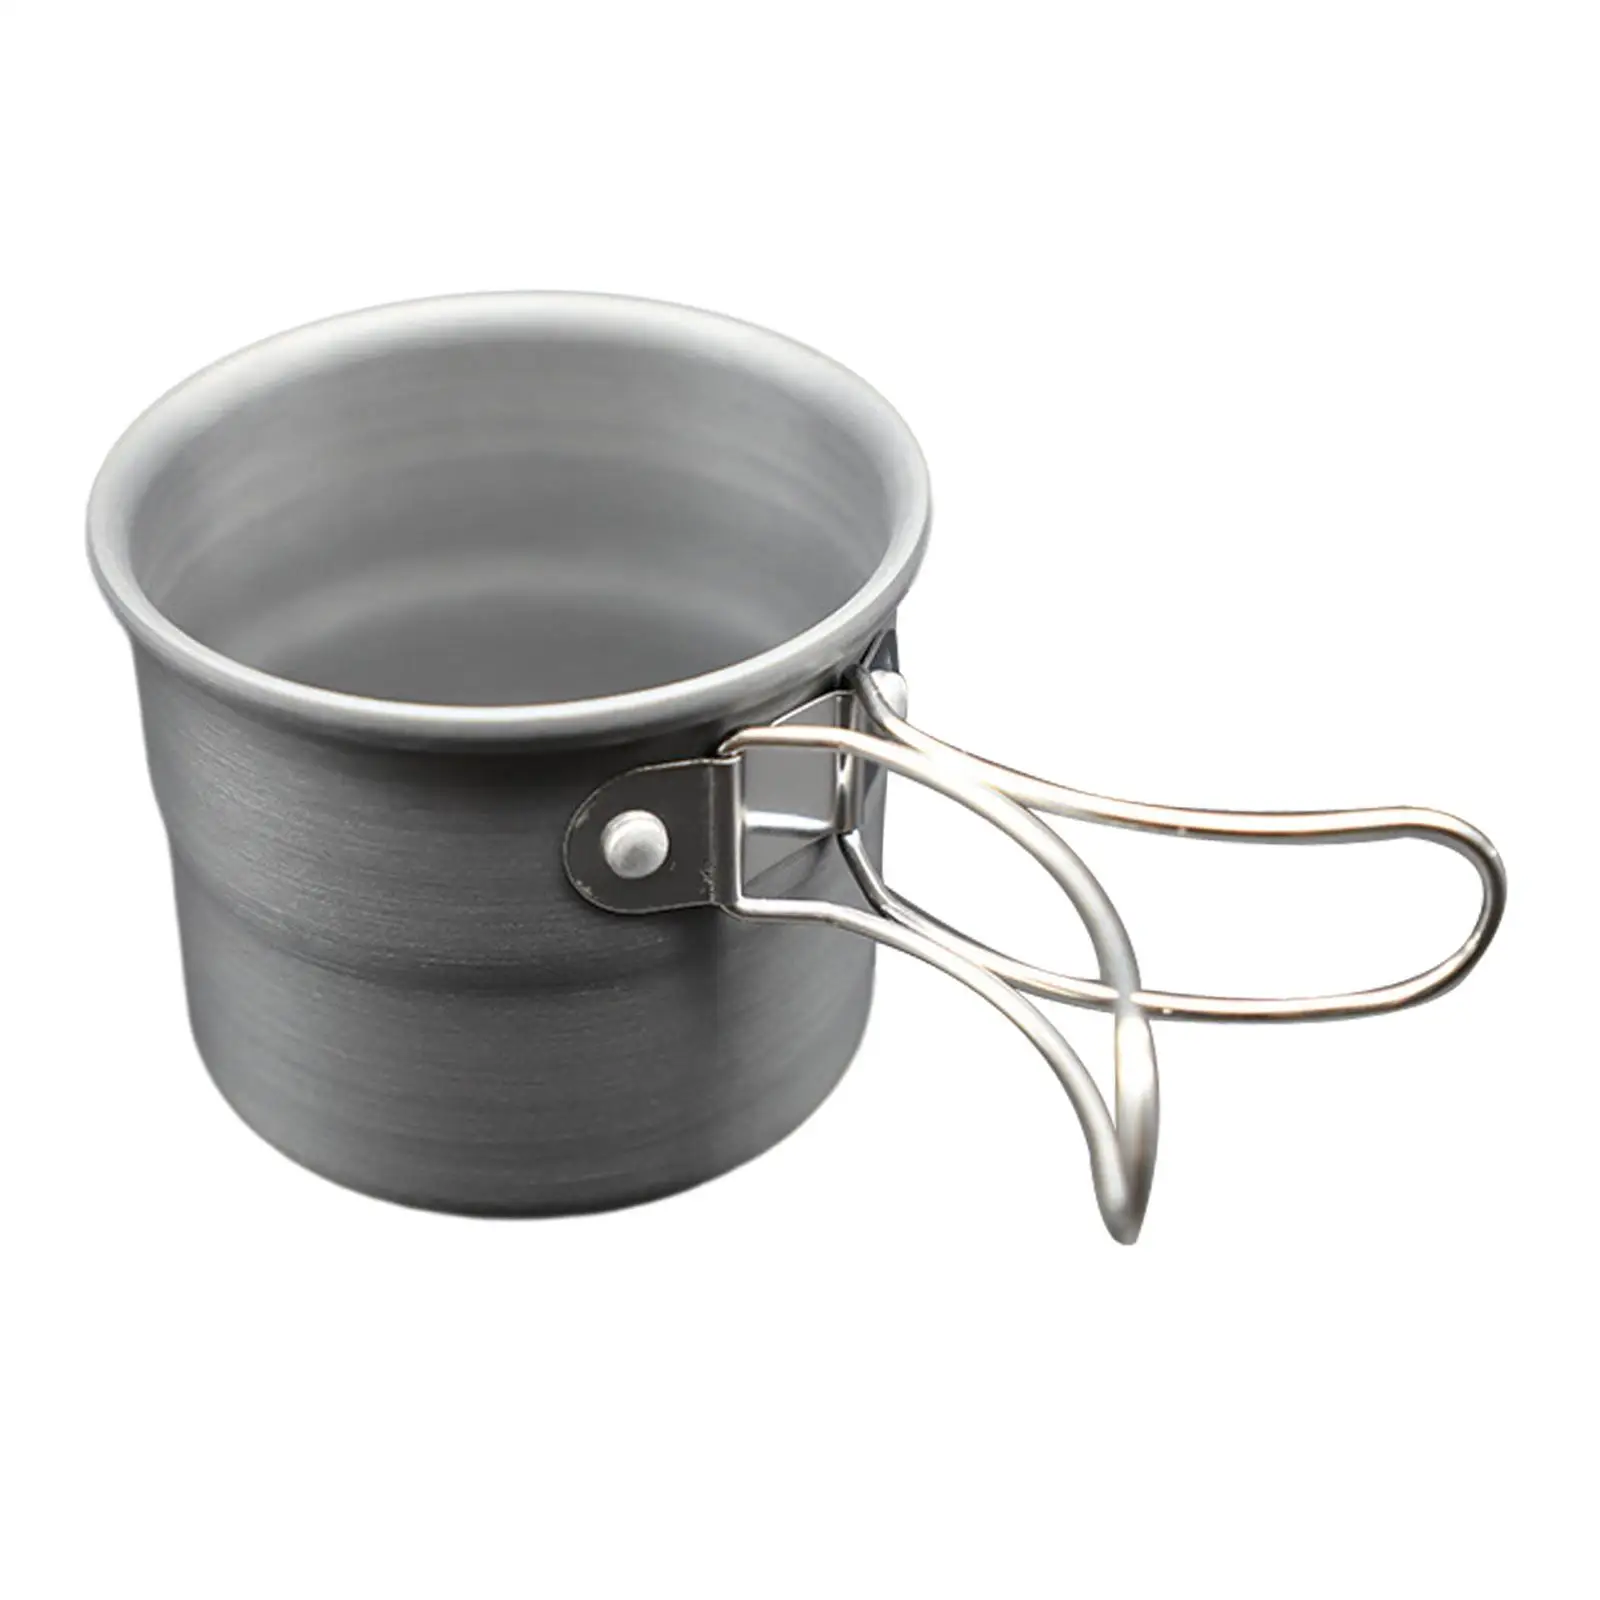 Camping Cup Drinkware Small Mug Aluminum Alloy with Foldable Handles for Hiking Backpacking